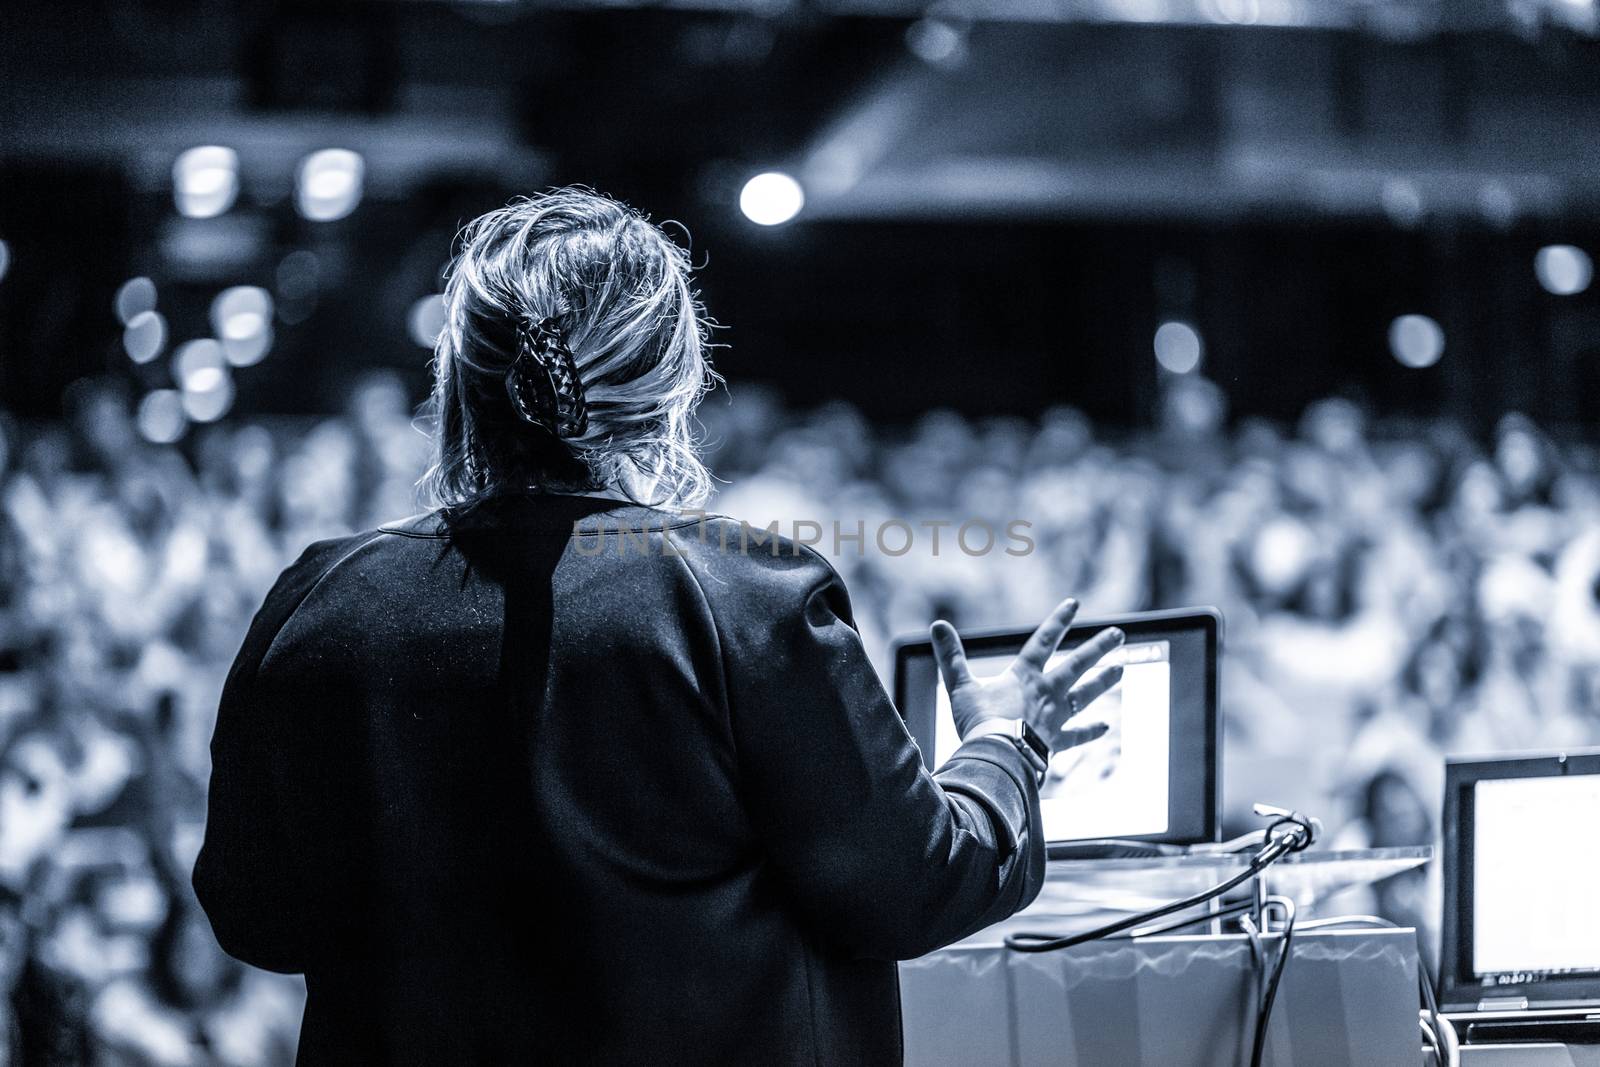 Female speaker giving a talk on corporate business conference. Unrecognizable people in audience at conference hall. Business and Entrepreneurship event. Black and white, blue toned image.